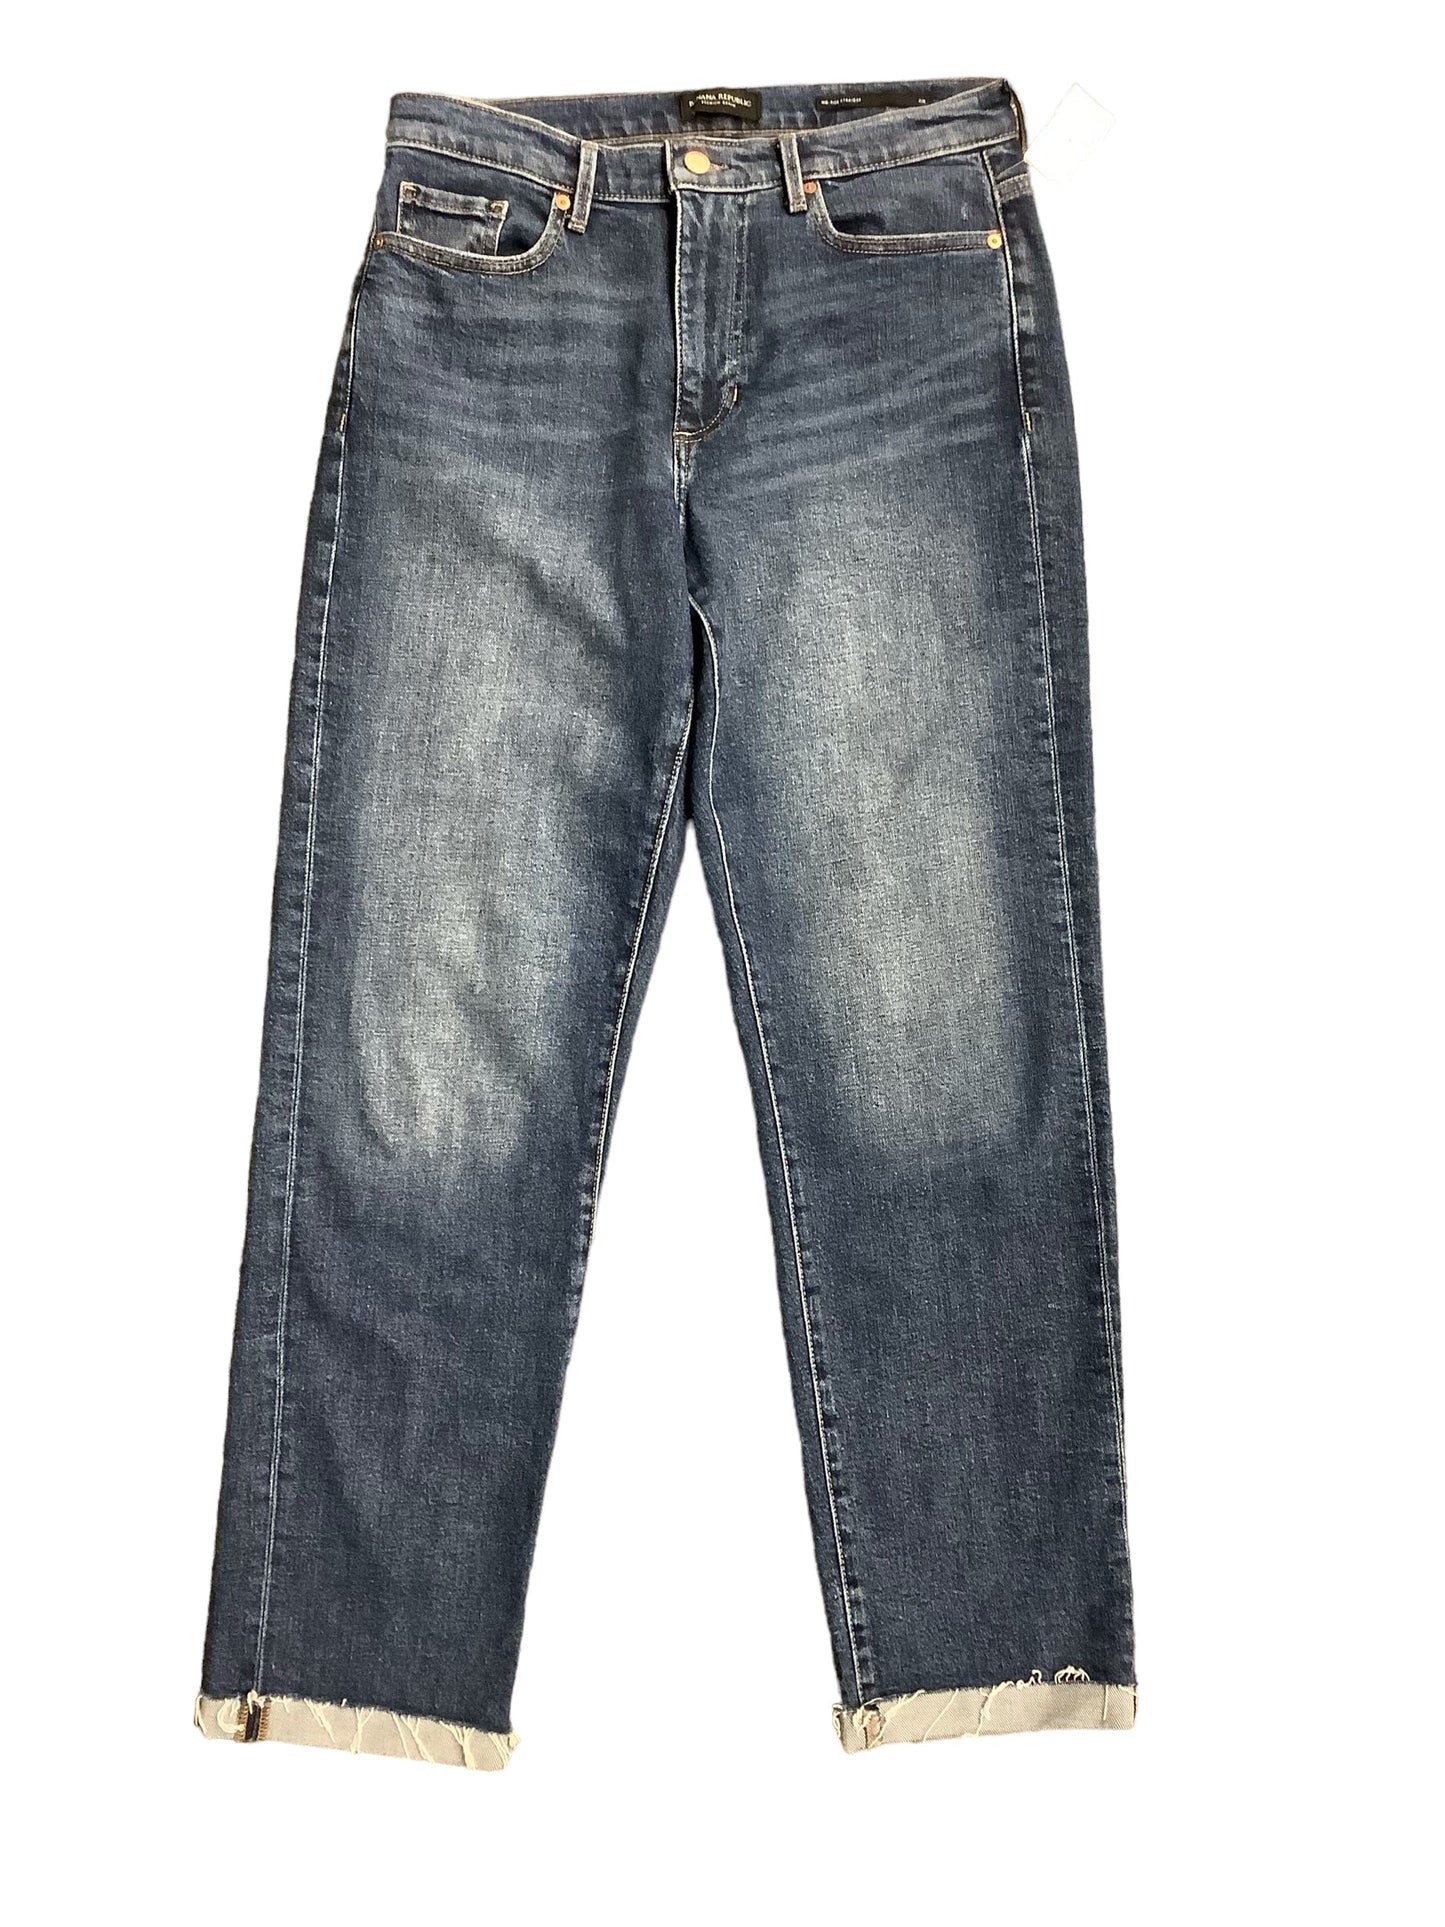 Jeans Straight By Banana Republic  Size: 29L/8L